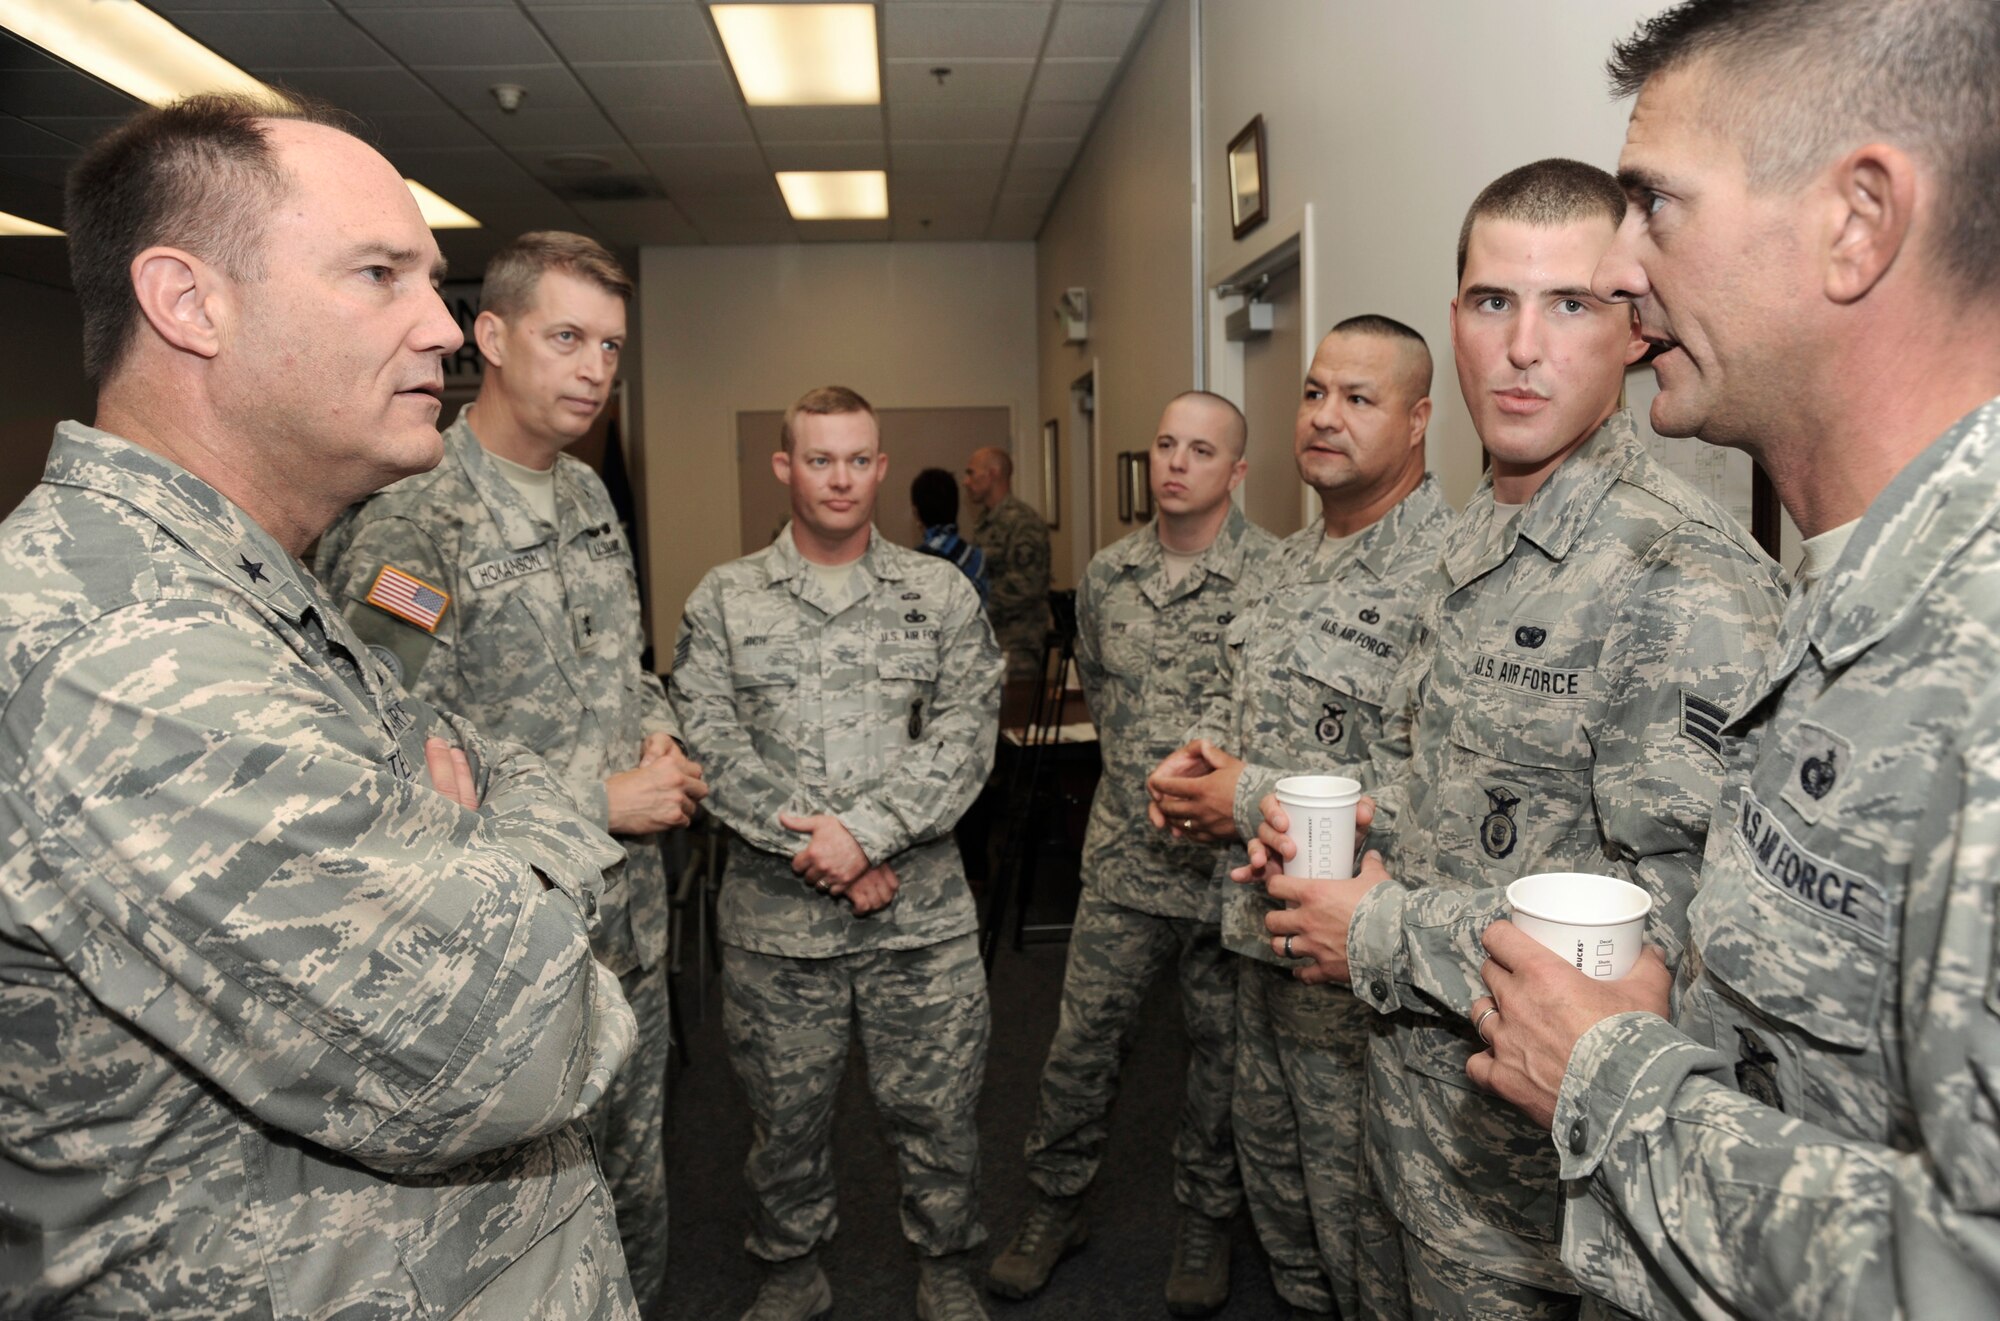 Oregon Brig. Gen. Michael Stencel (left), Assistant Adjutant General for Air and Maj. Gen. Daniel Hokanson, Oregon Adjutant General, talk with Staff Sgt. Matthew Ritchie (far right) and other members of the 142nd Fighter Wing Security Forces Squadron during a USO event as part of their in processing at the Portland Air National Guard Base, Ore., Aug. 9, 2013.  (Air National Guard photo by Tech. Sgt. John Hughel, 142nd Fighter Wing Public Affairs/released)